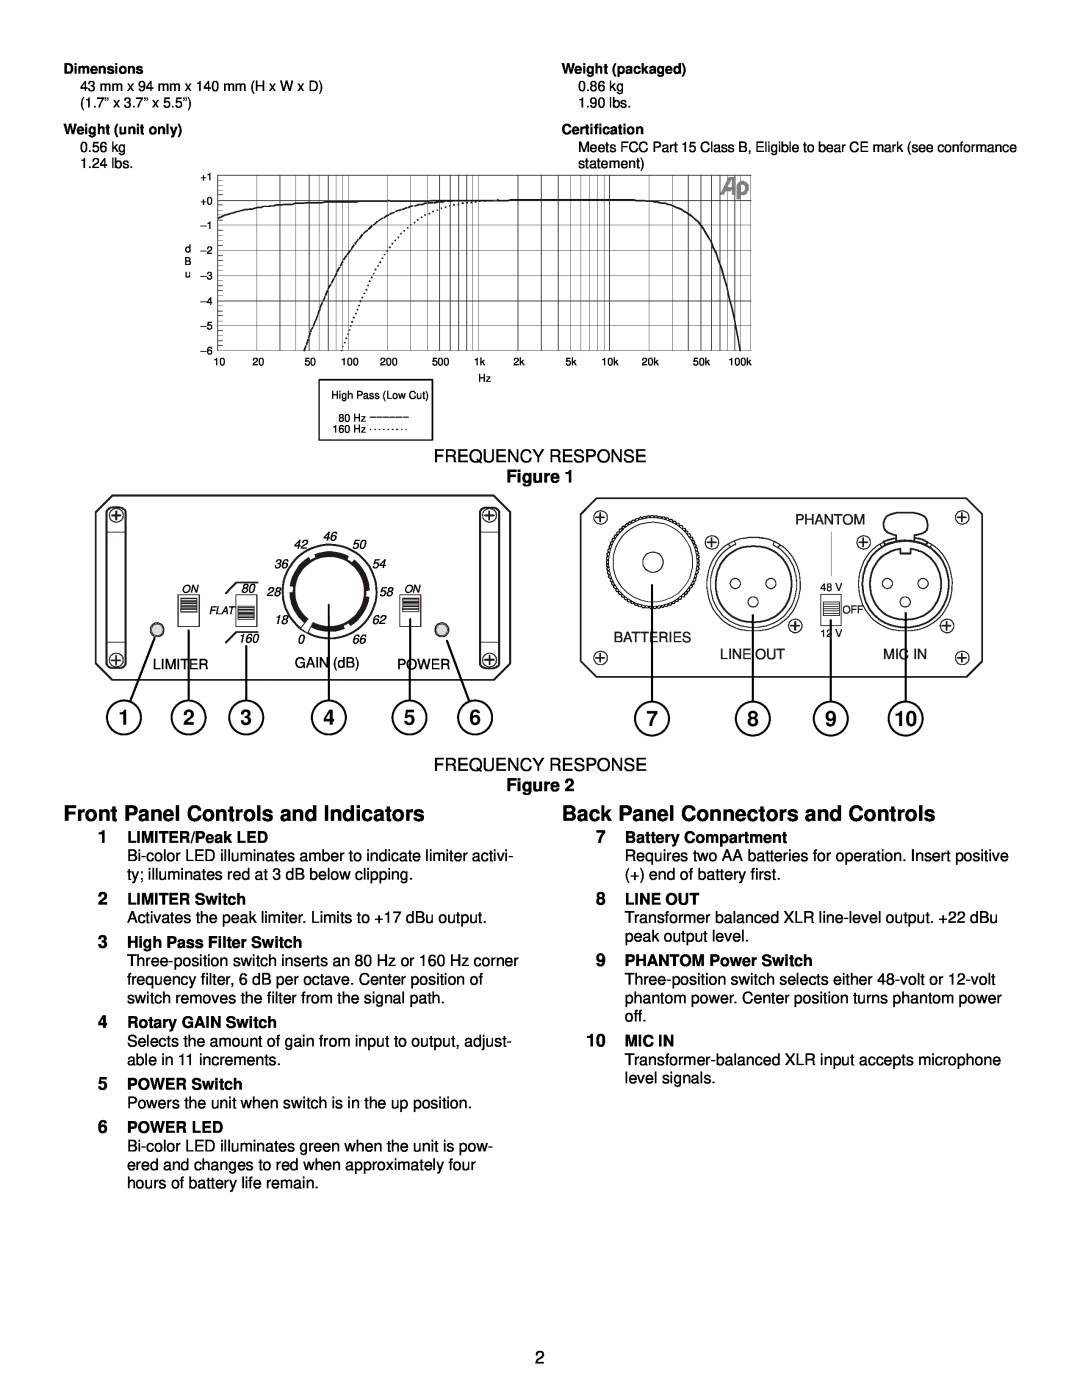 Shure FP23 specifications Front Panel Controls and Indicators, Back Panel Connectors and Controls 